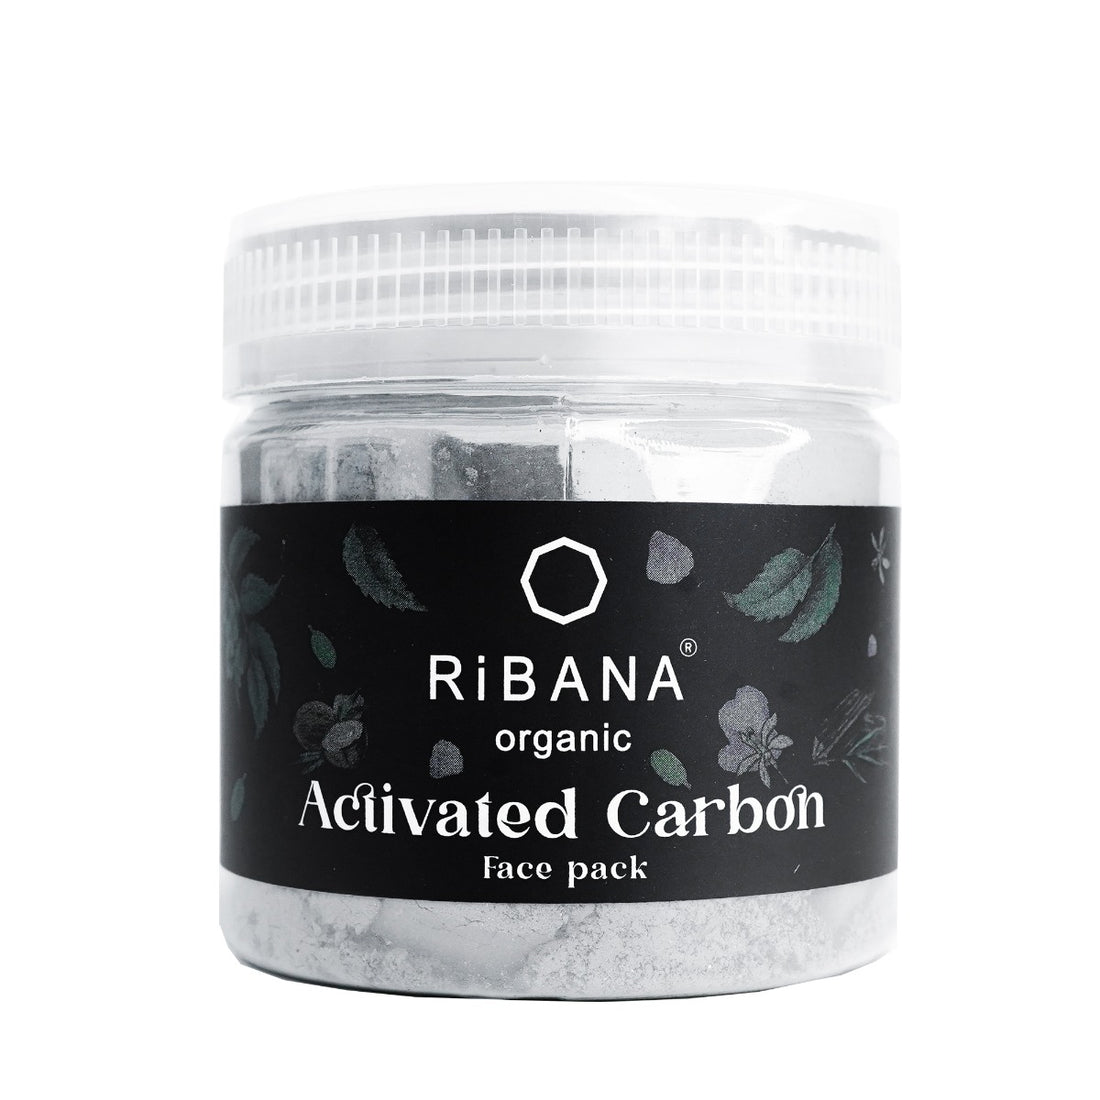 RiBANA Activated Charcoal Face Pack (50gm)